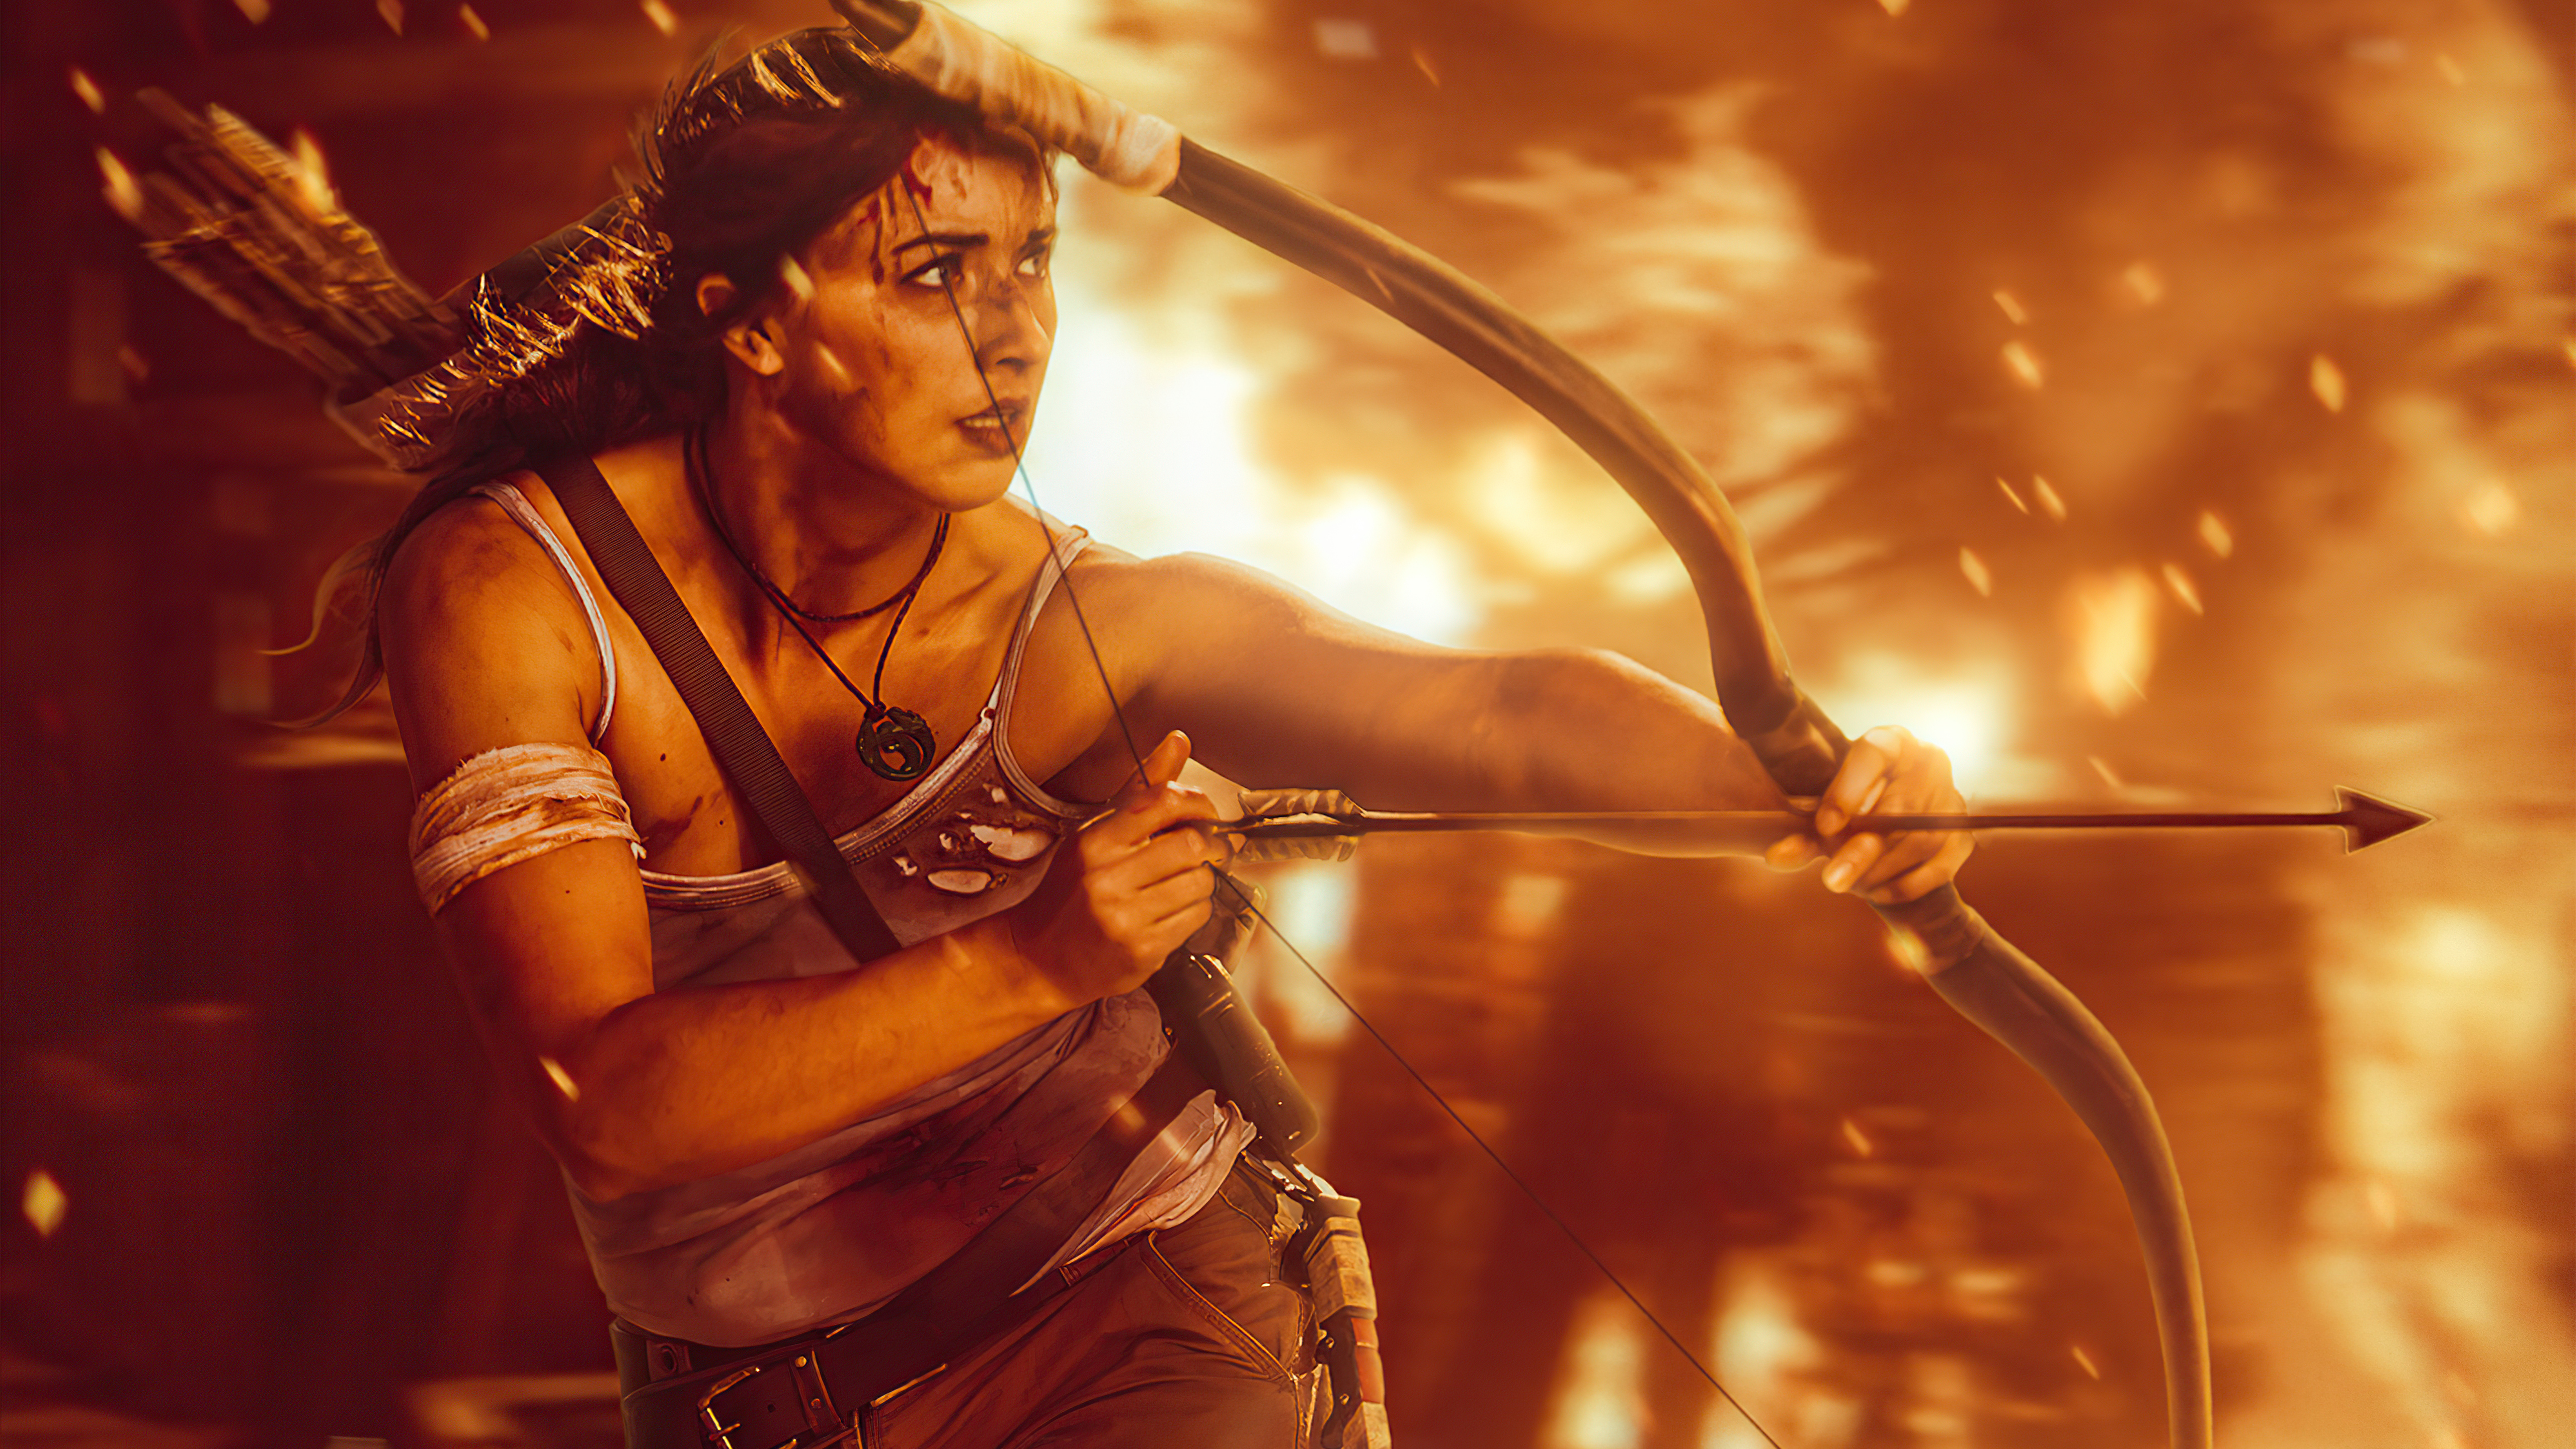 5120x2880 Lara Croft Crimson Fire 5k HD 4k Wallpapers, Images, Backgrounds,  Photos and Pictures